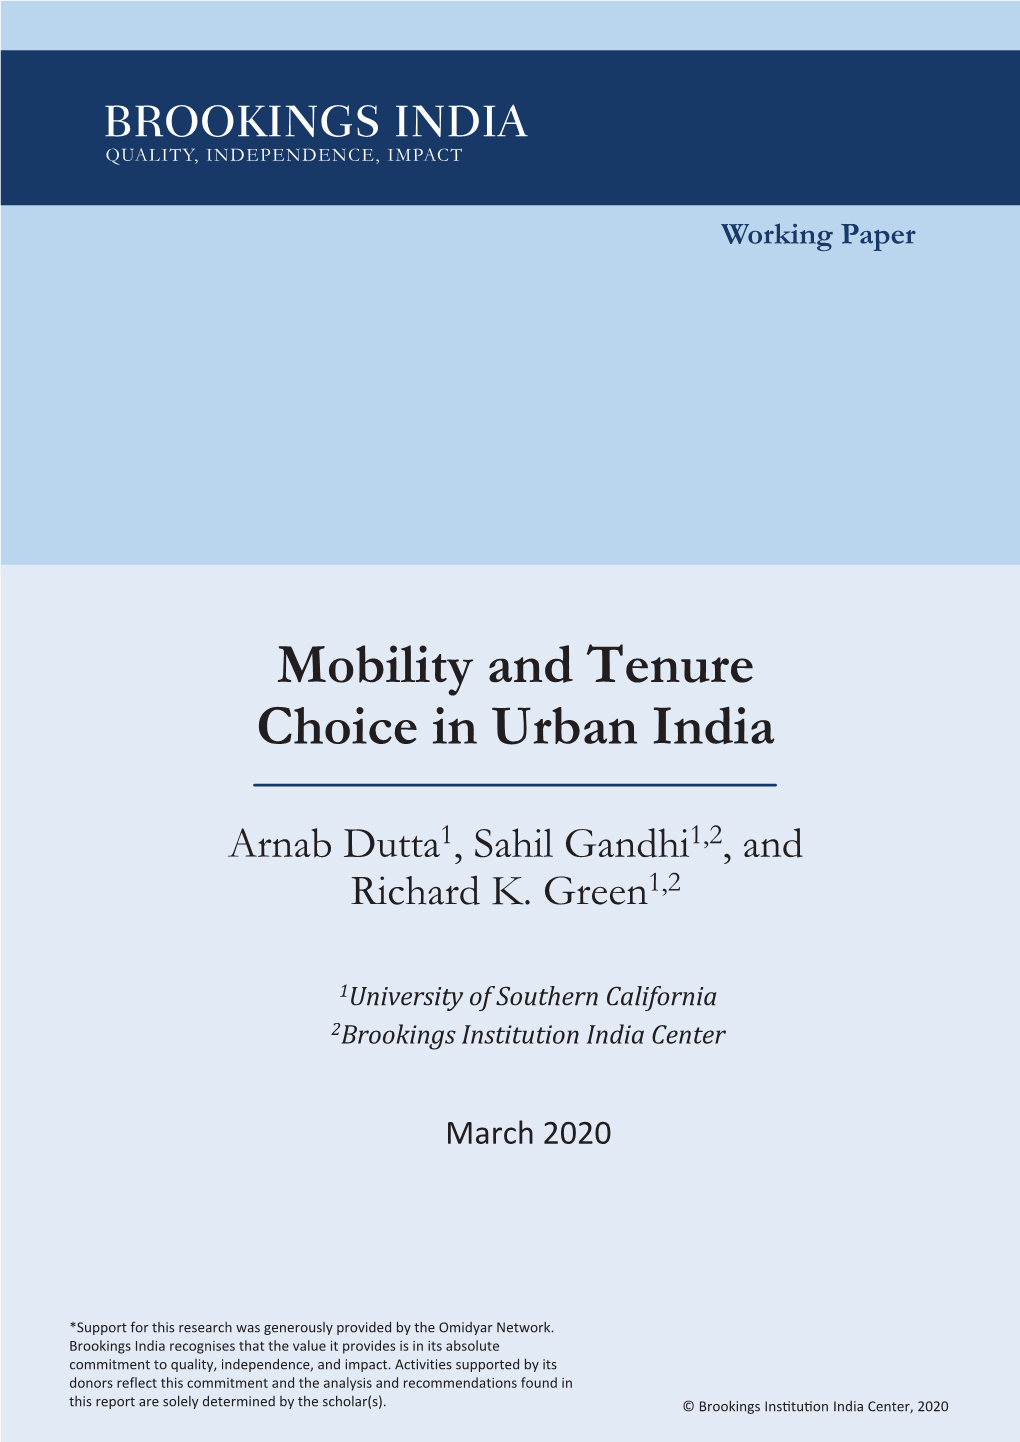 Mobility and Tenure Choice in Urban India